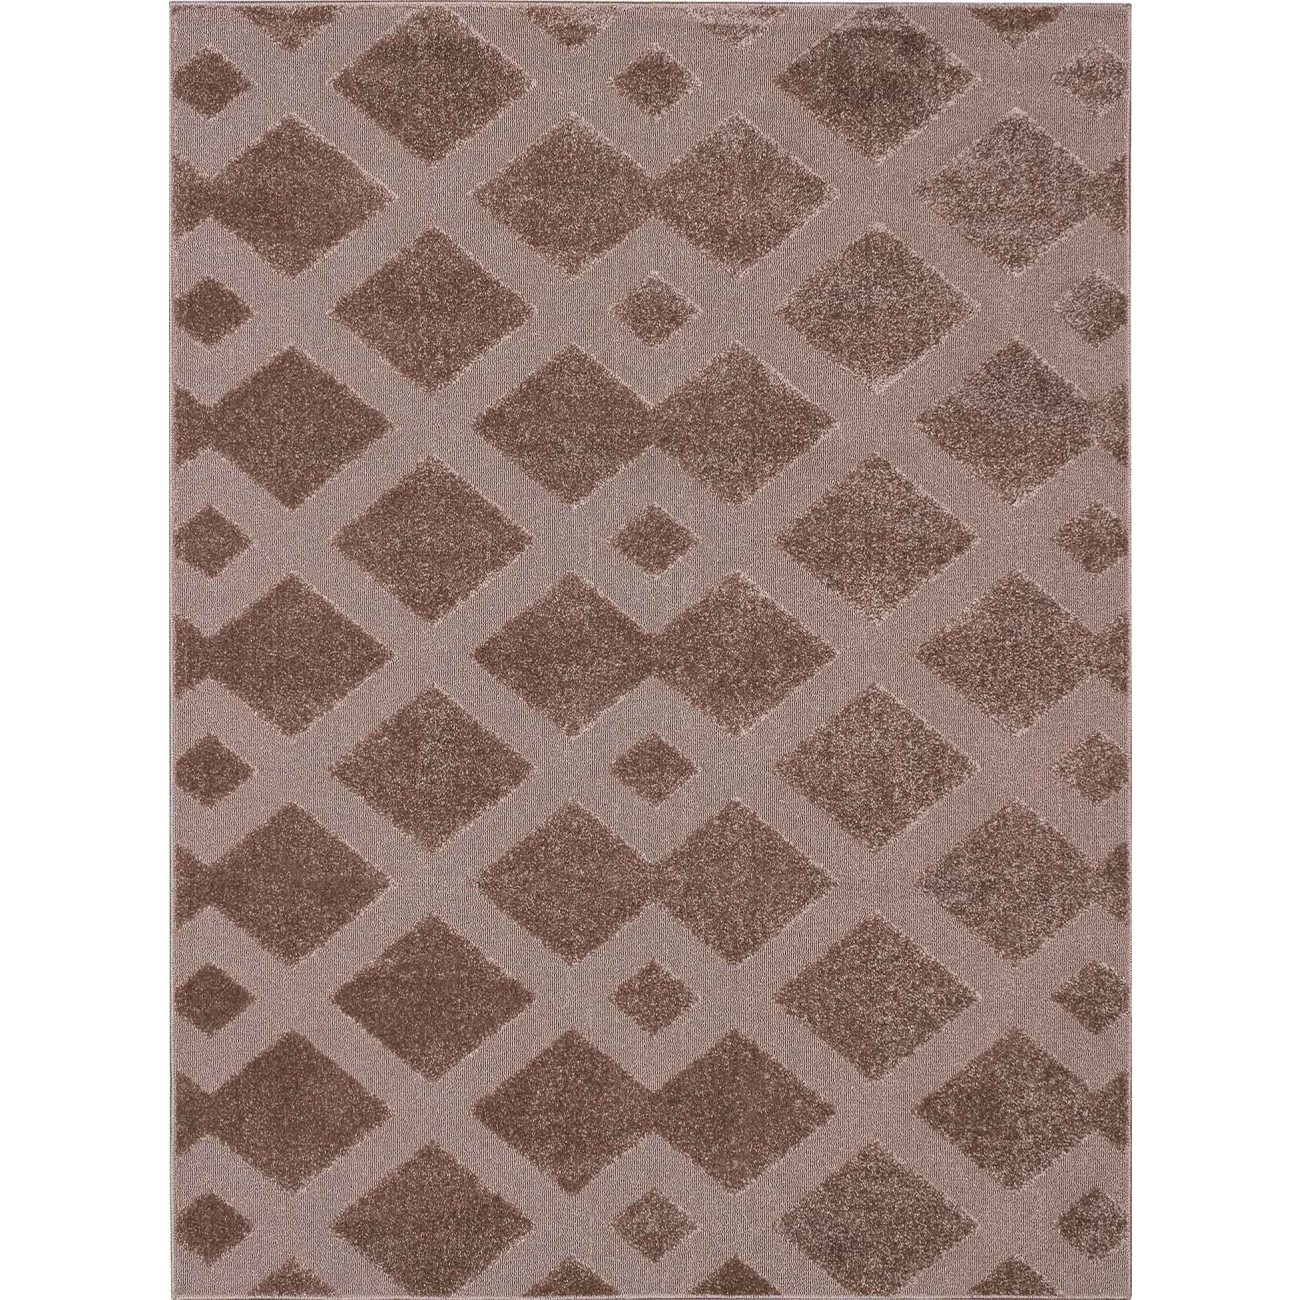 Tapete Realce Trilho Taupe - 200x250